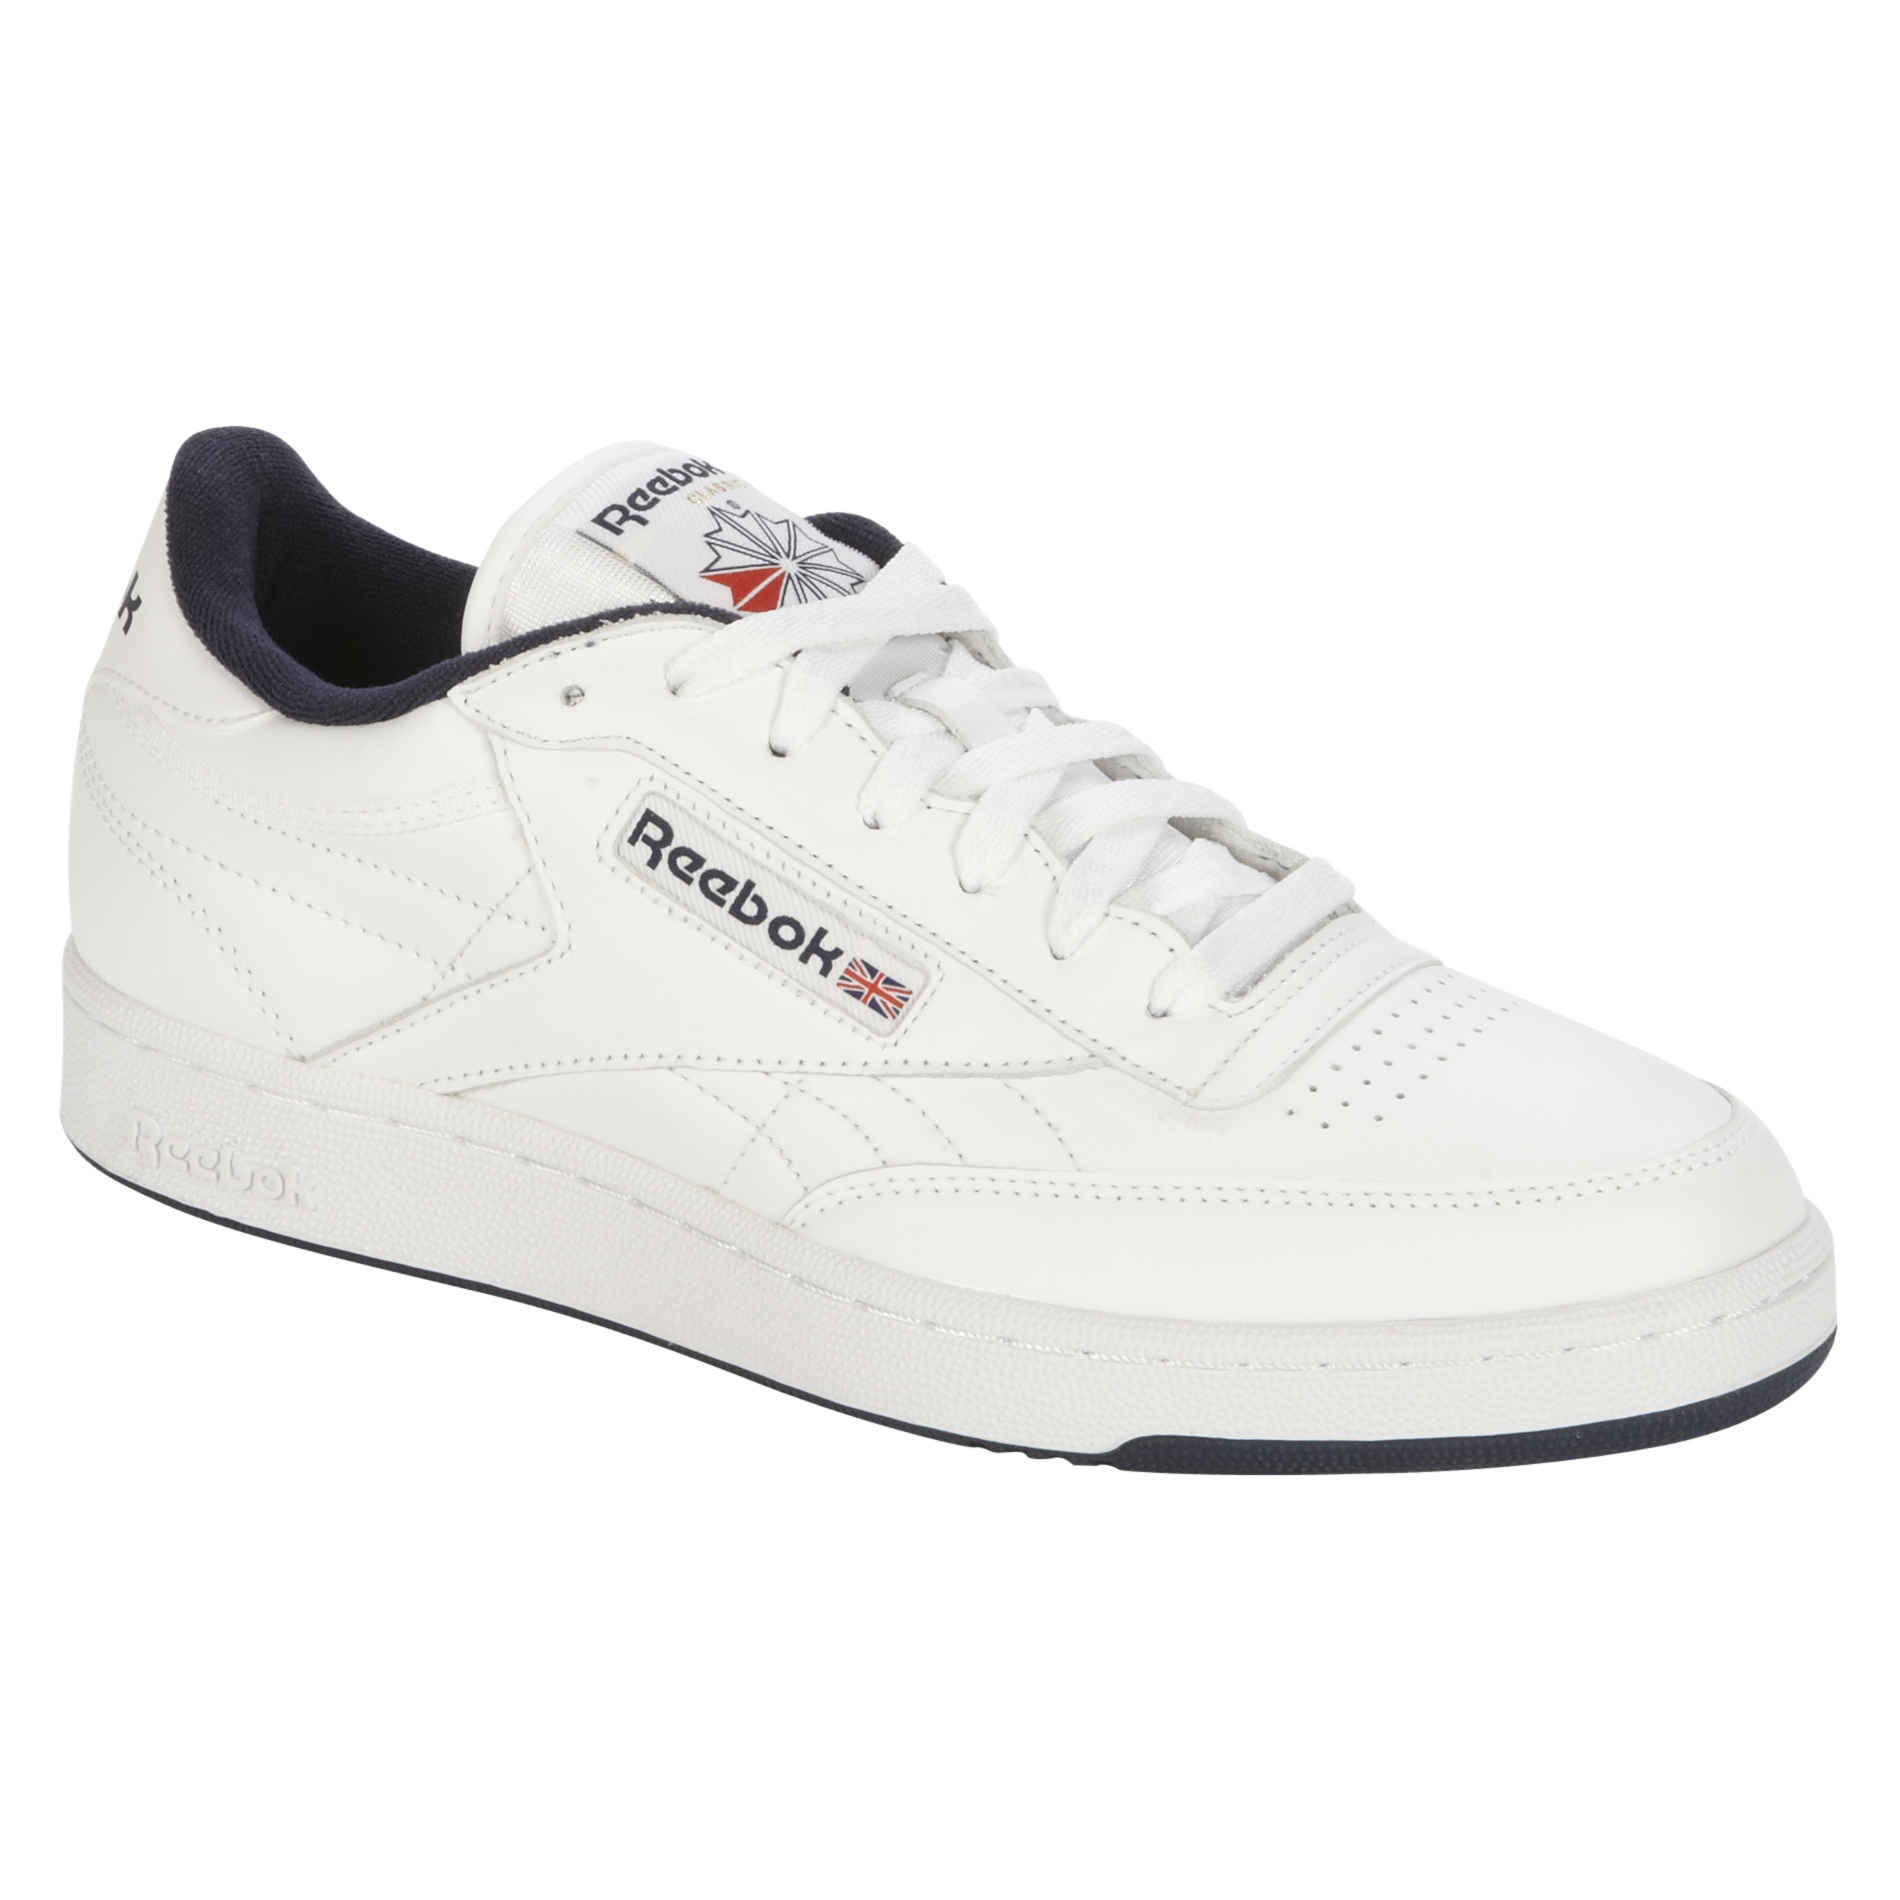 UPC 054871005985 product image for Men's Classic Club-C Casual Athletic Shoe - White/Navy | upcitemdb.com